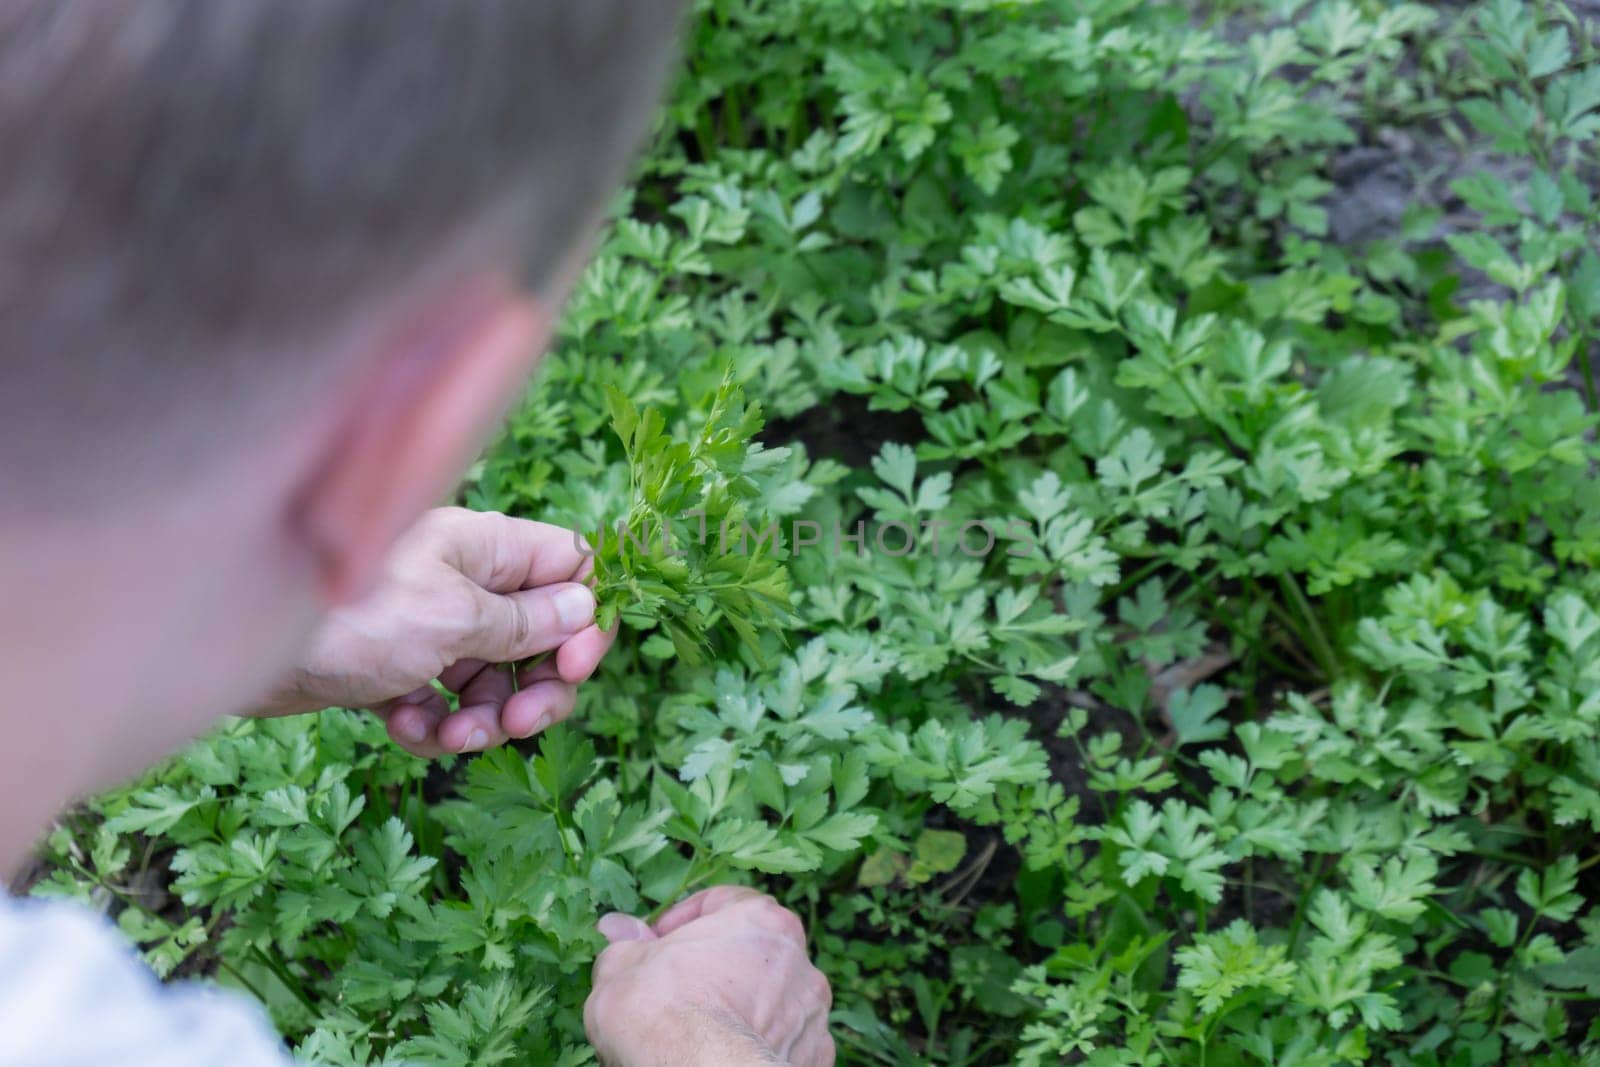 Farmers hands collect parsley in garden open air. Organic home gardening and cultivation of greenery herbs concept. Locally grown fresh veggies